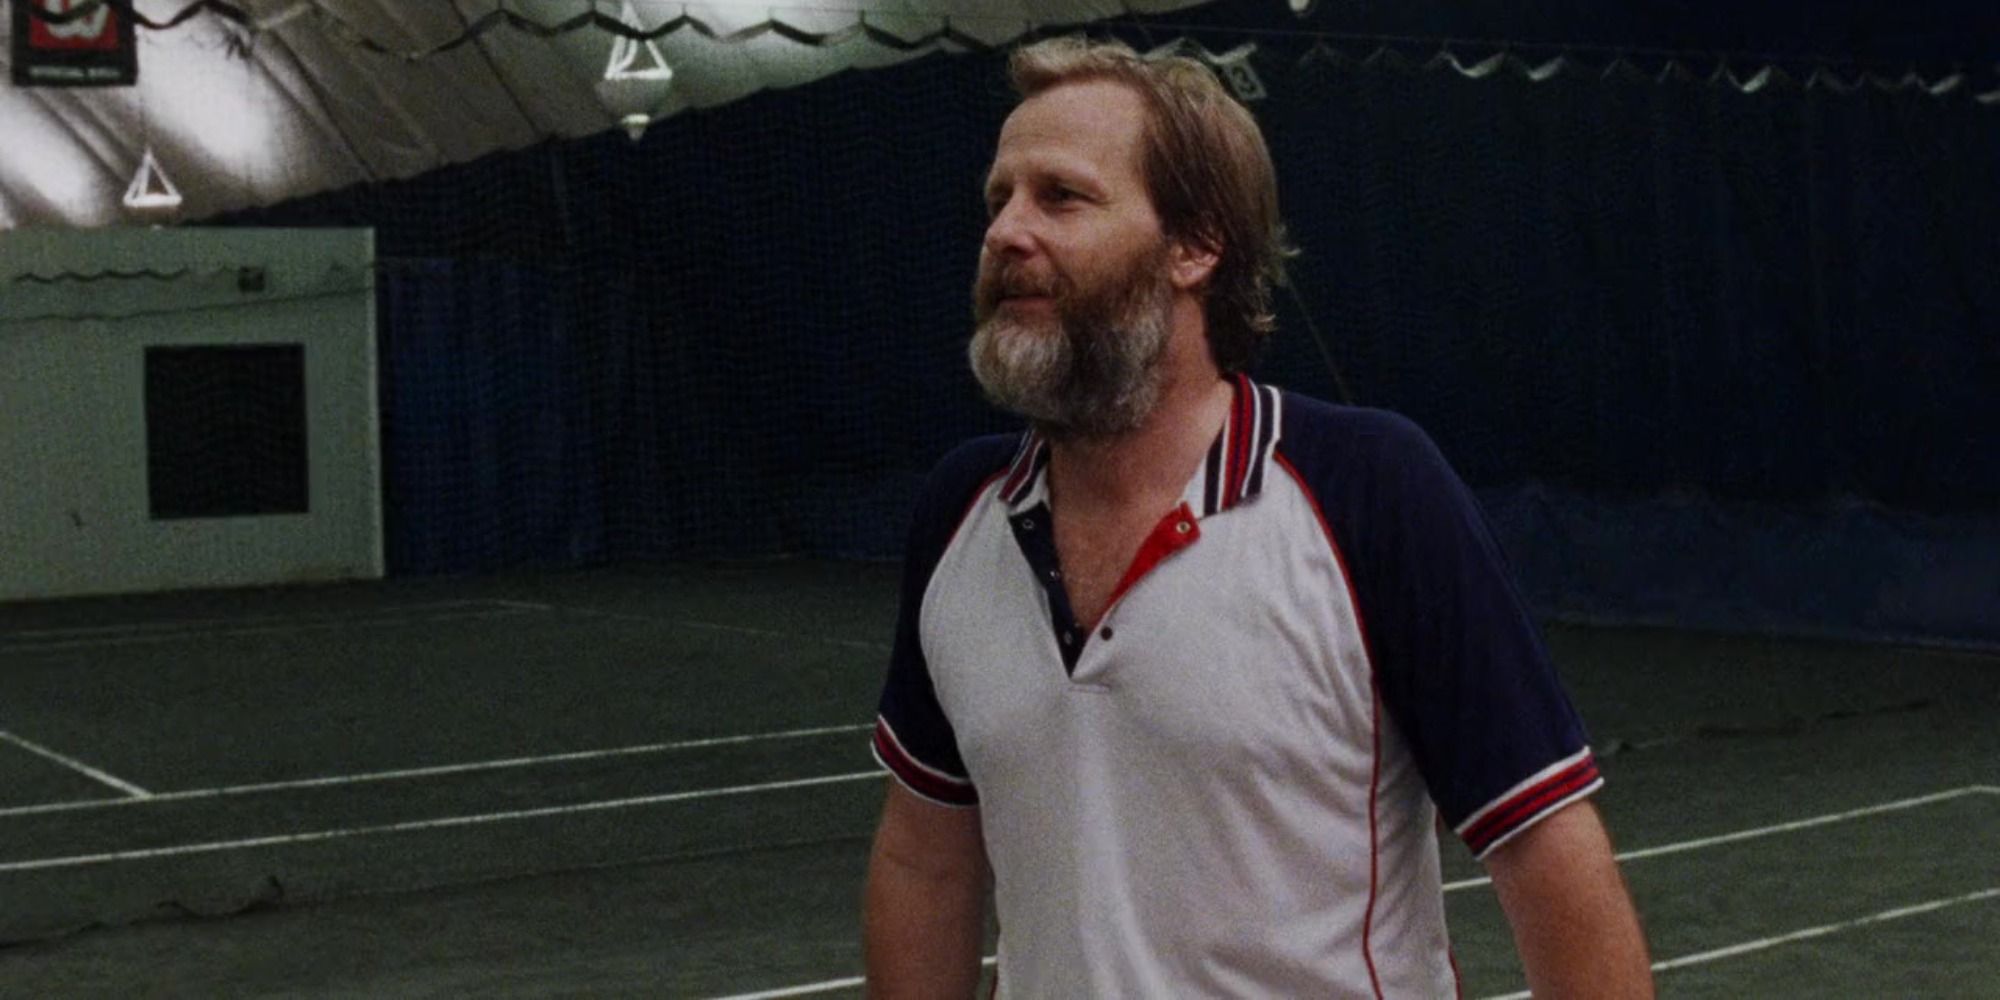 Bernard on the tennis court in The Squid and the Whale